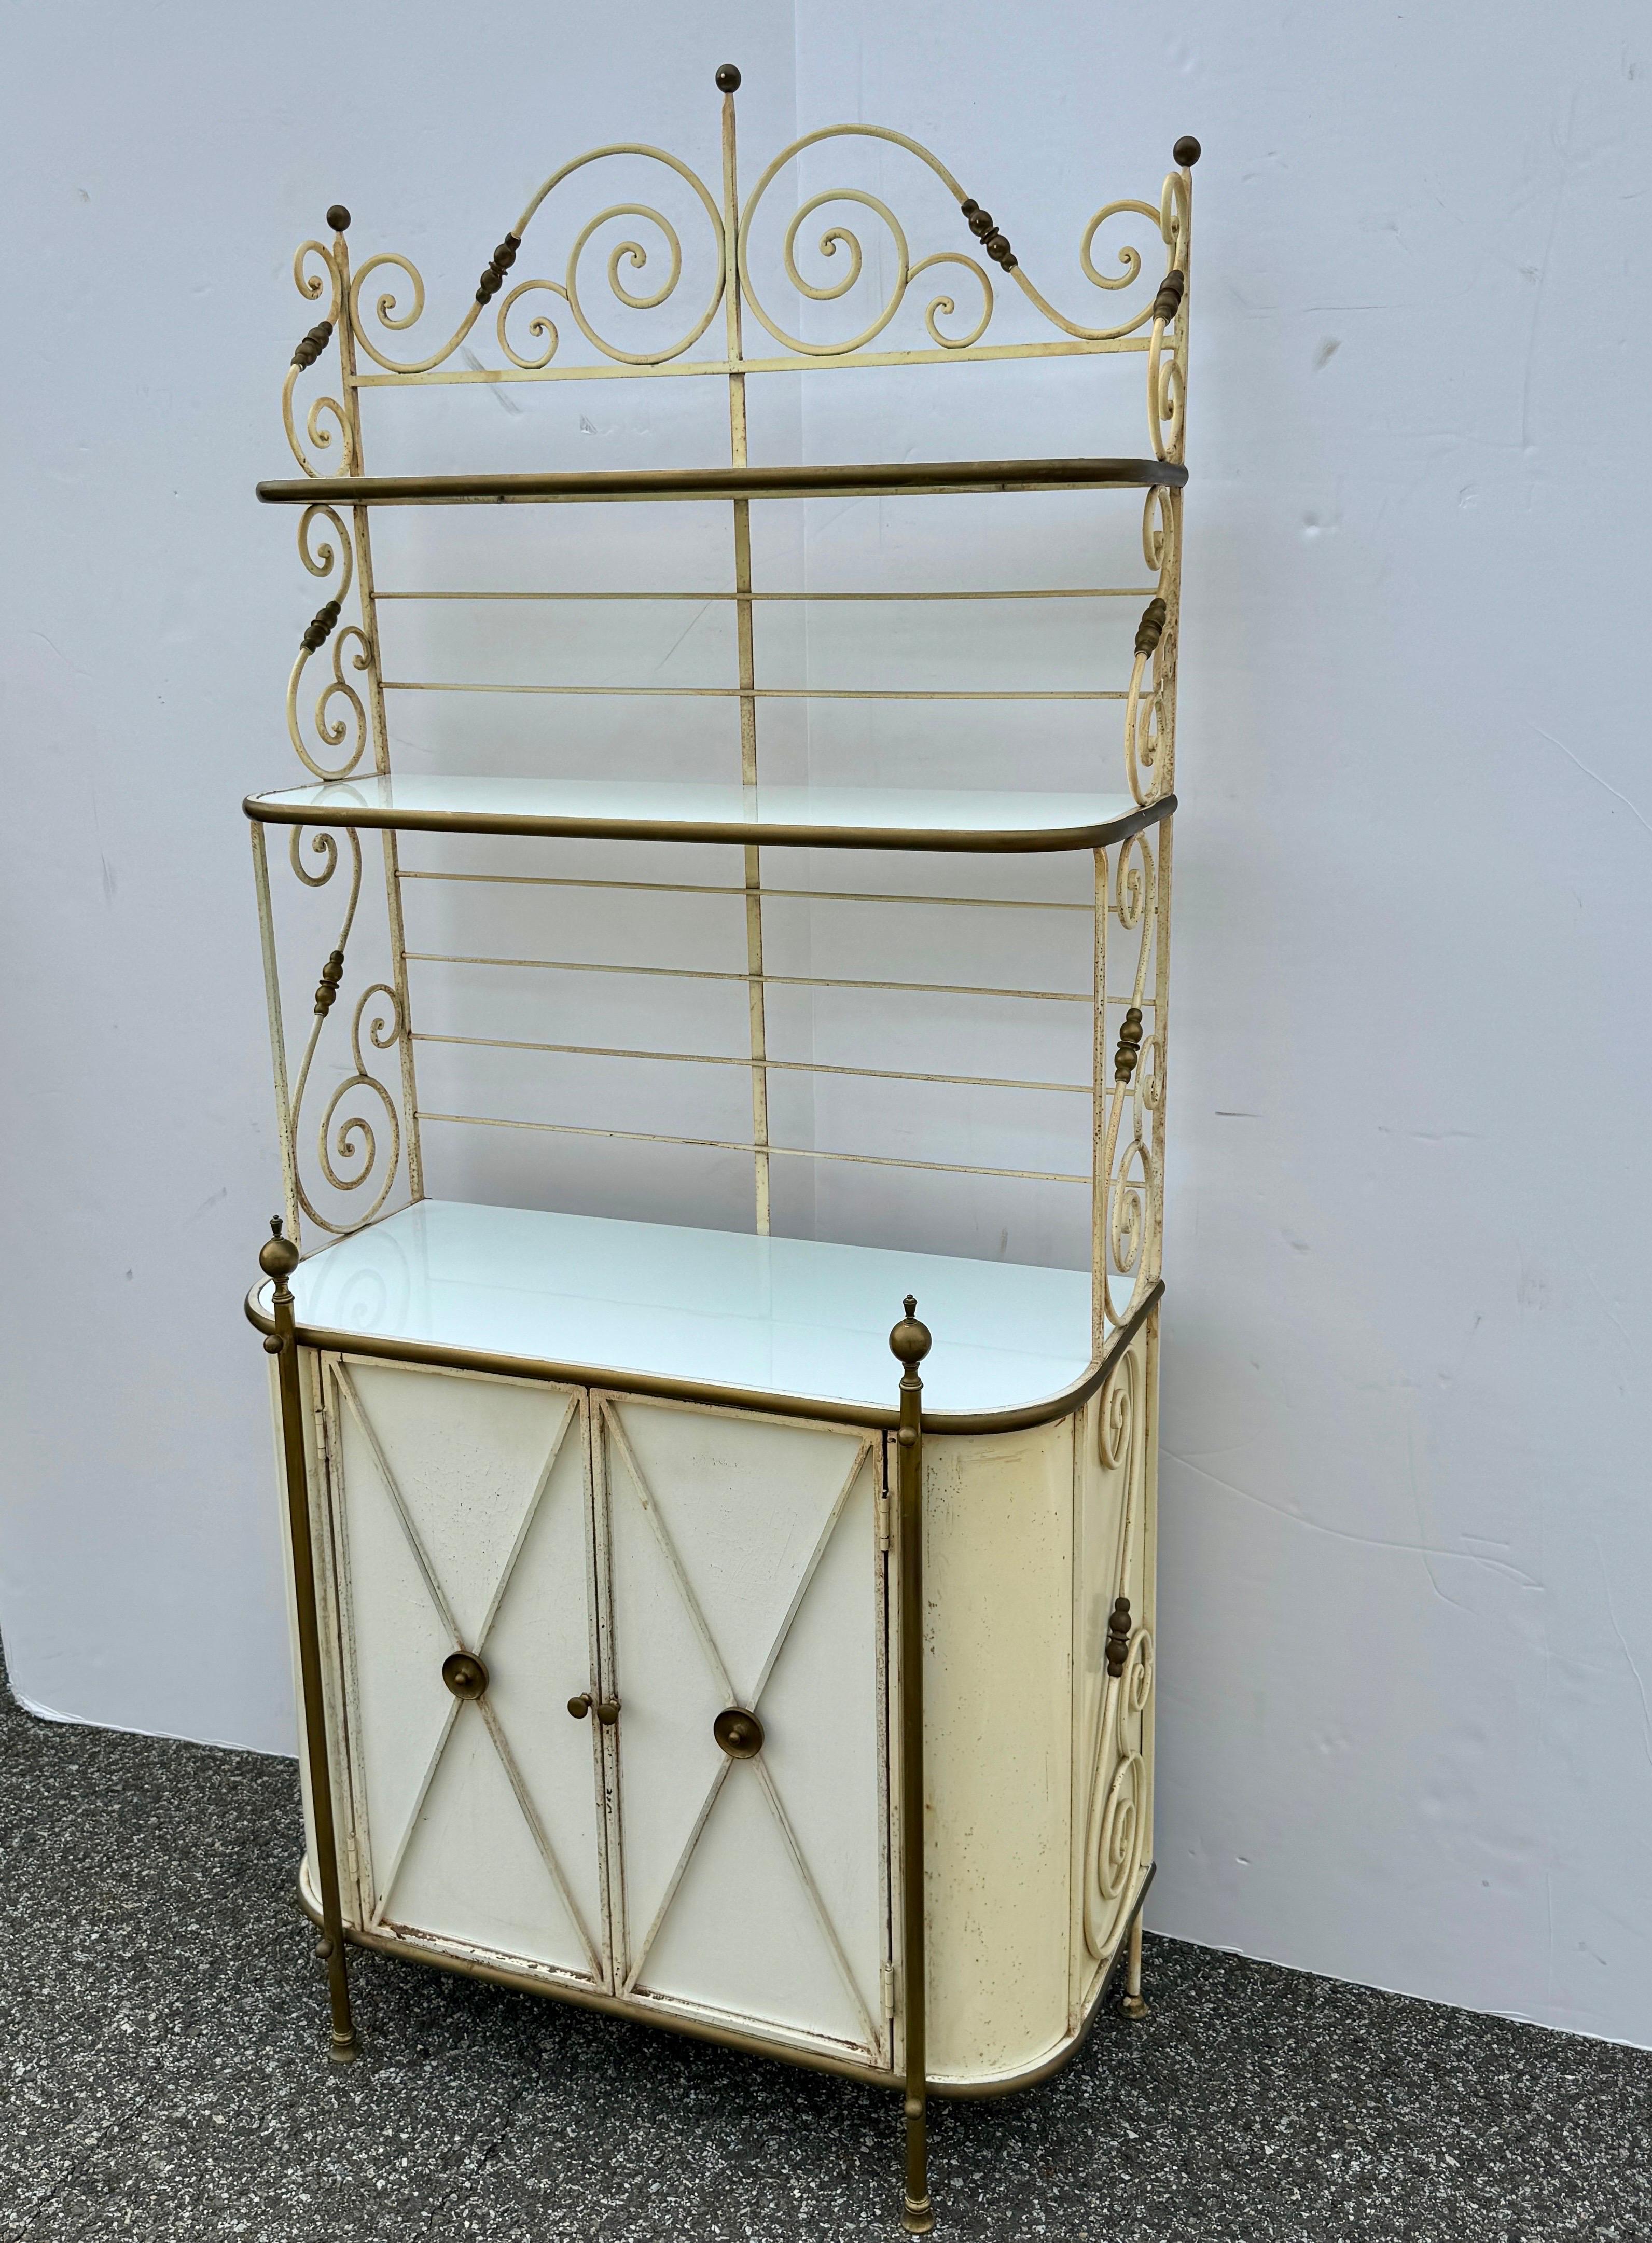 Hand-Crafted Mid-Century French Iron Brass Bakers Rack Bar Cabinet For Sale